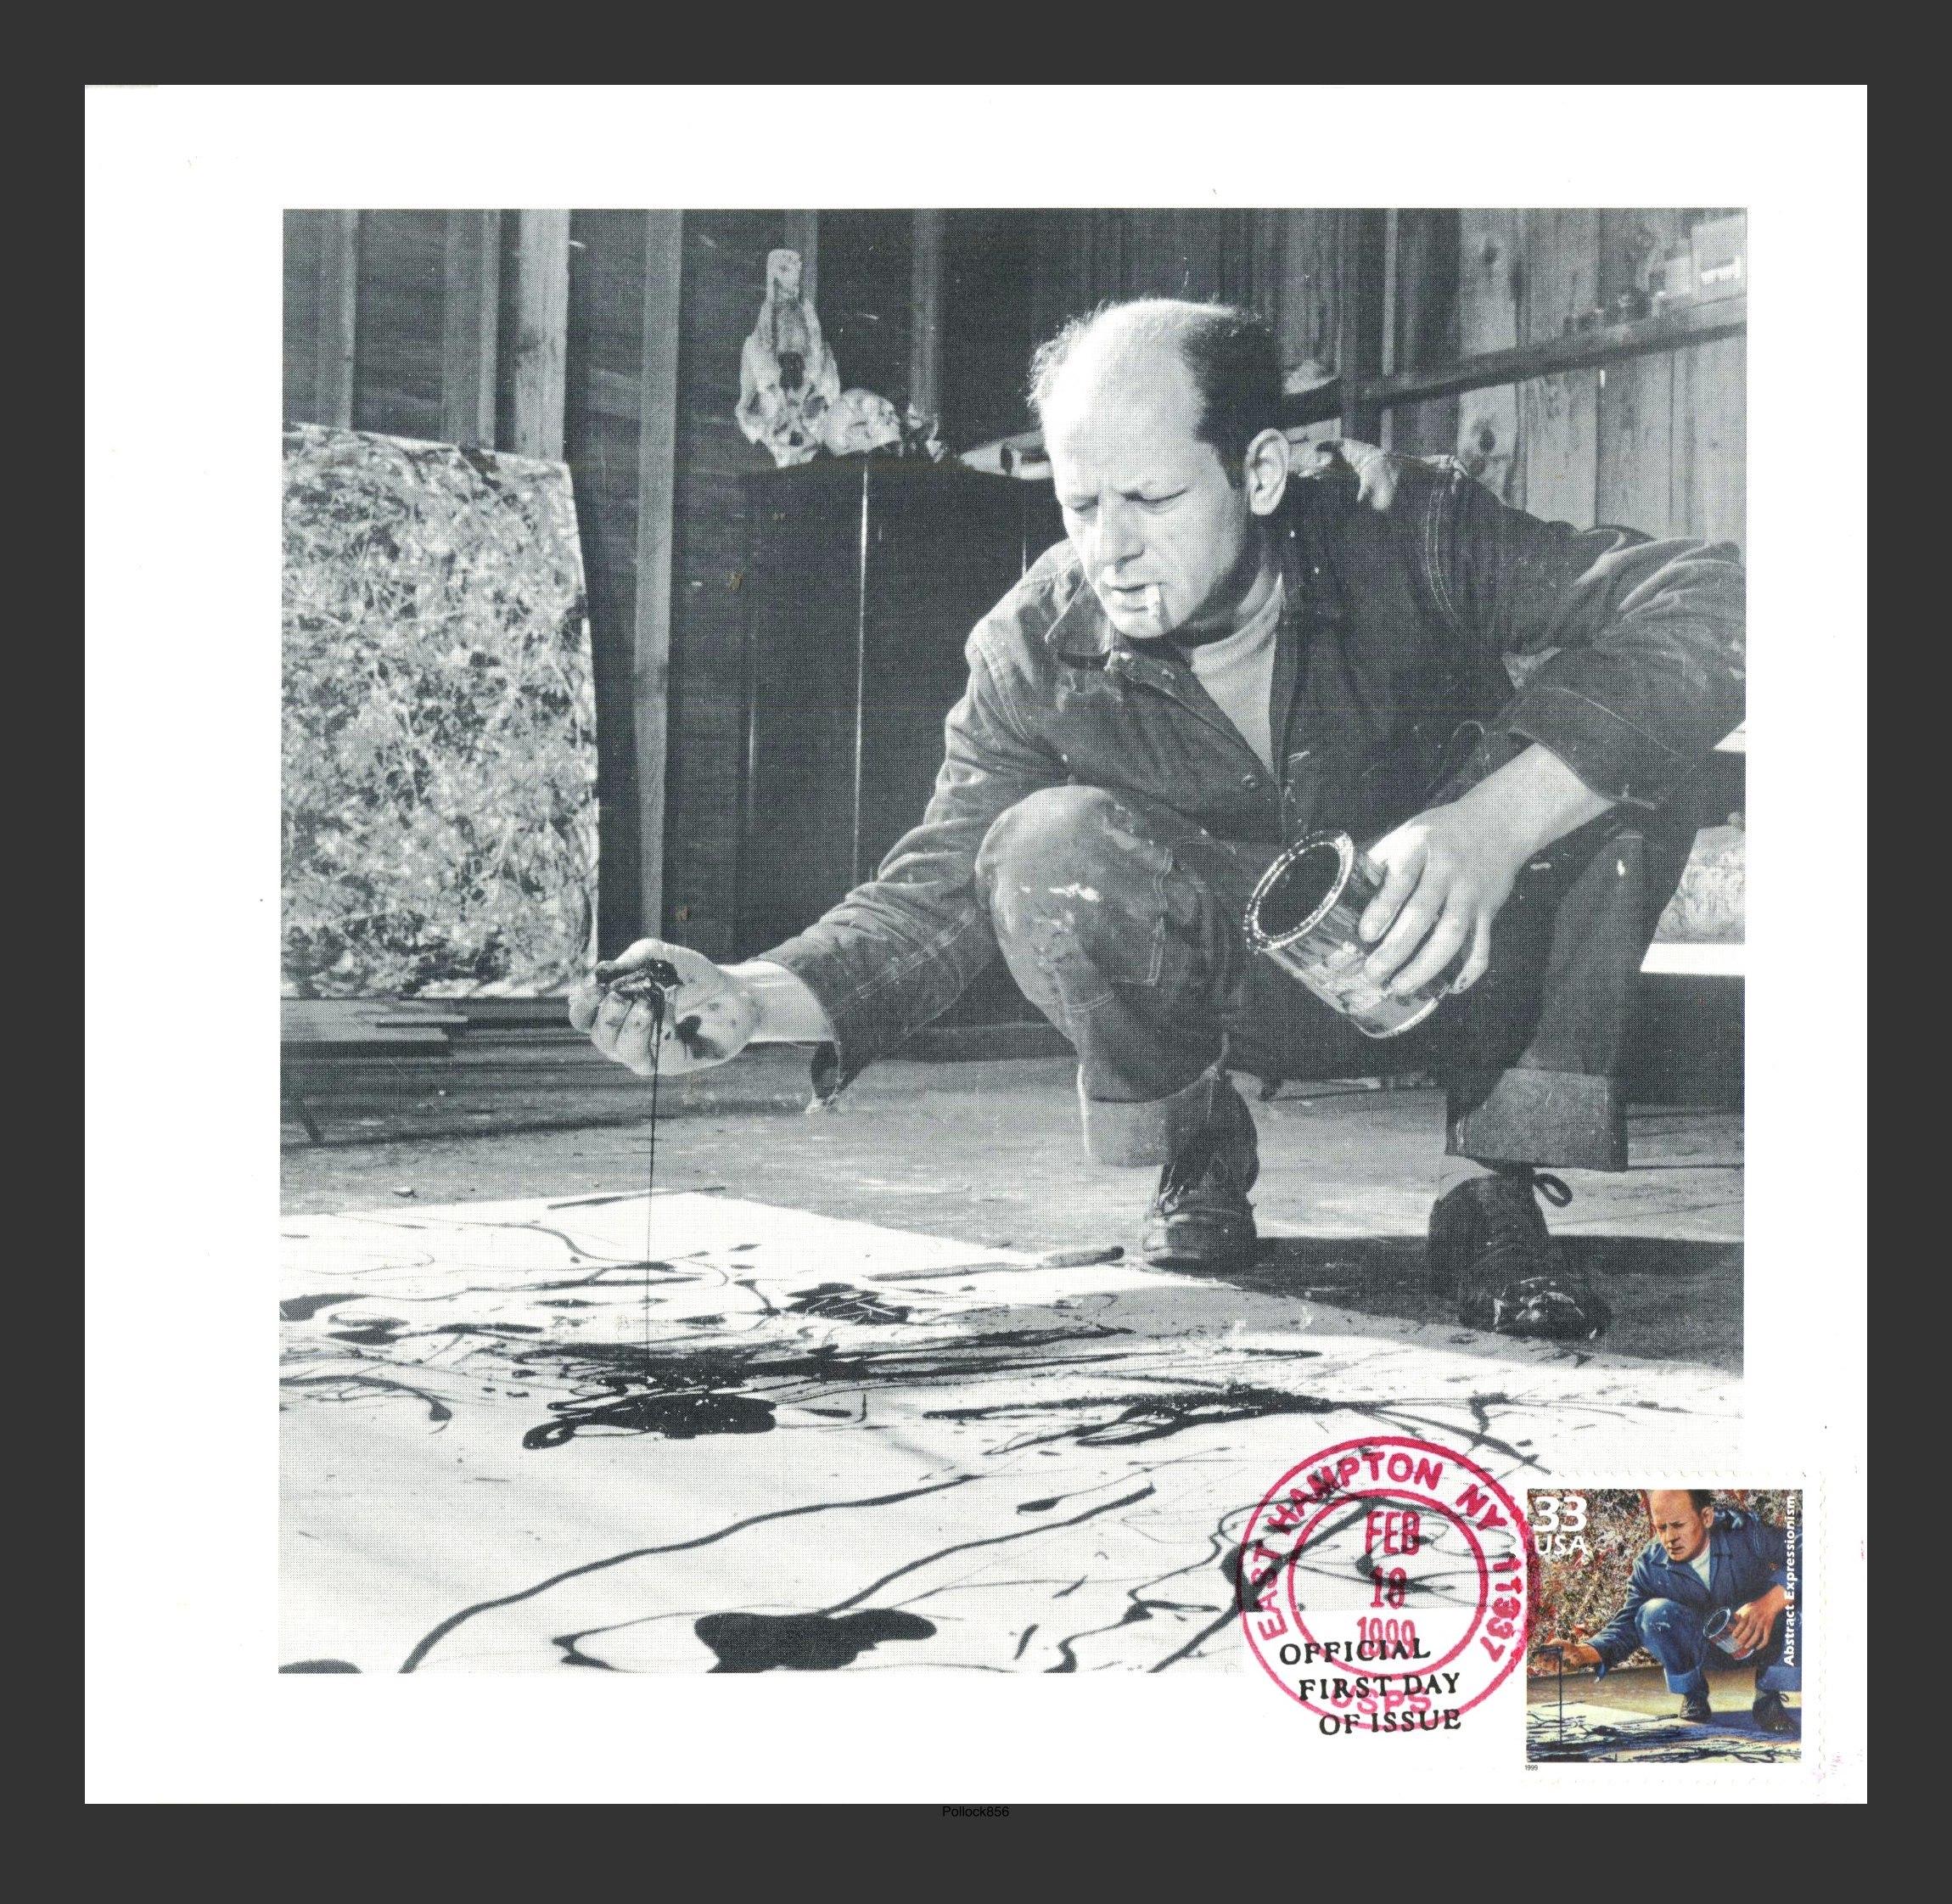 Jackson Pollock
Exclusive invitation with first day cover, 1999
Offset lithograph fold out invitation with postmarked first day cover
Stamp with official postmark from the US Post Office, dated with a dateline of Southampton, NY, bearing text